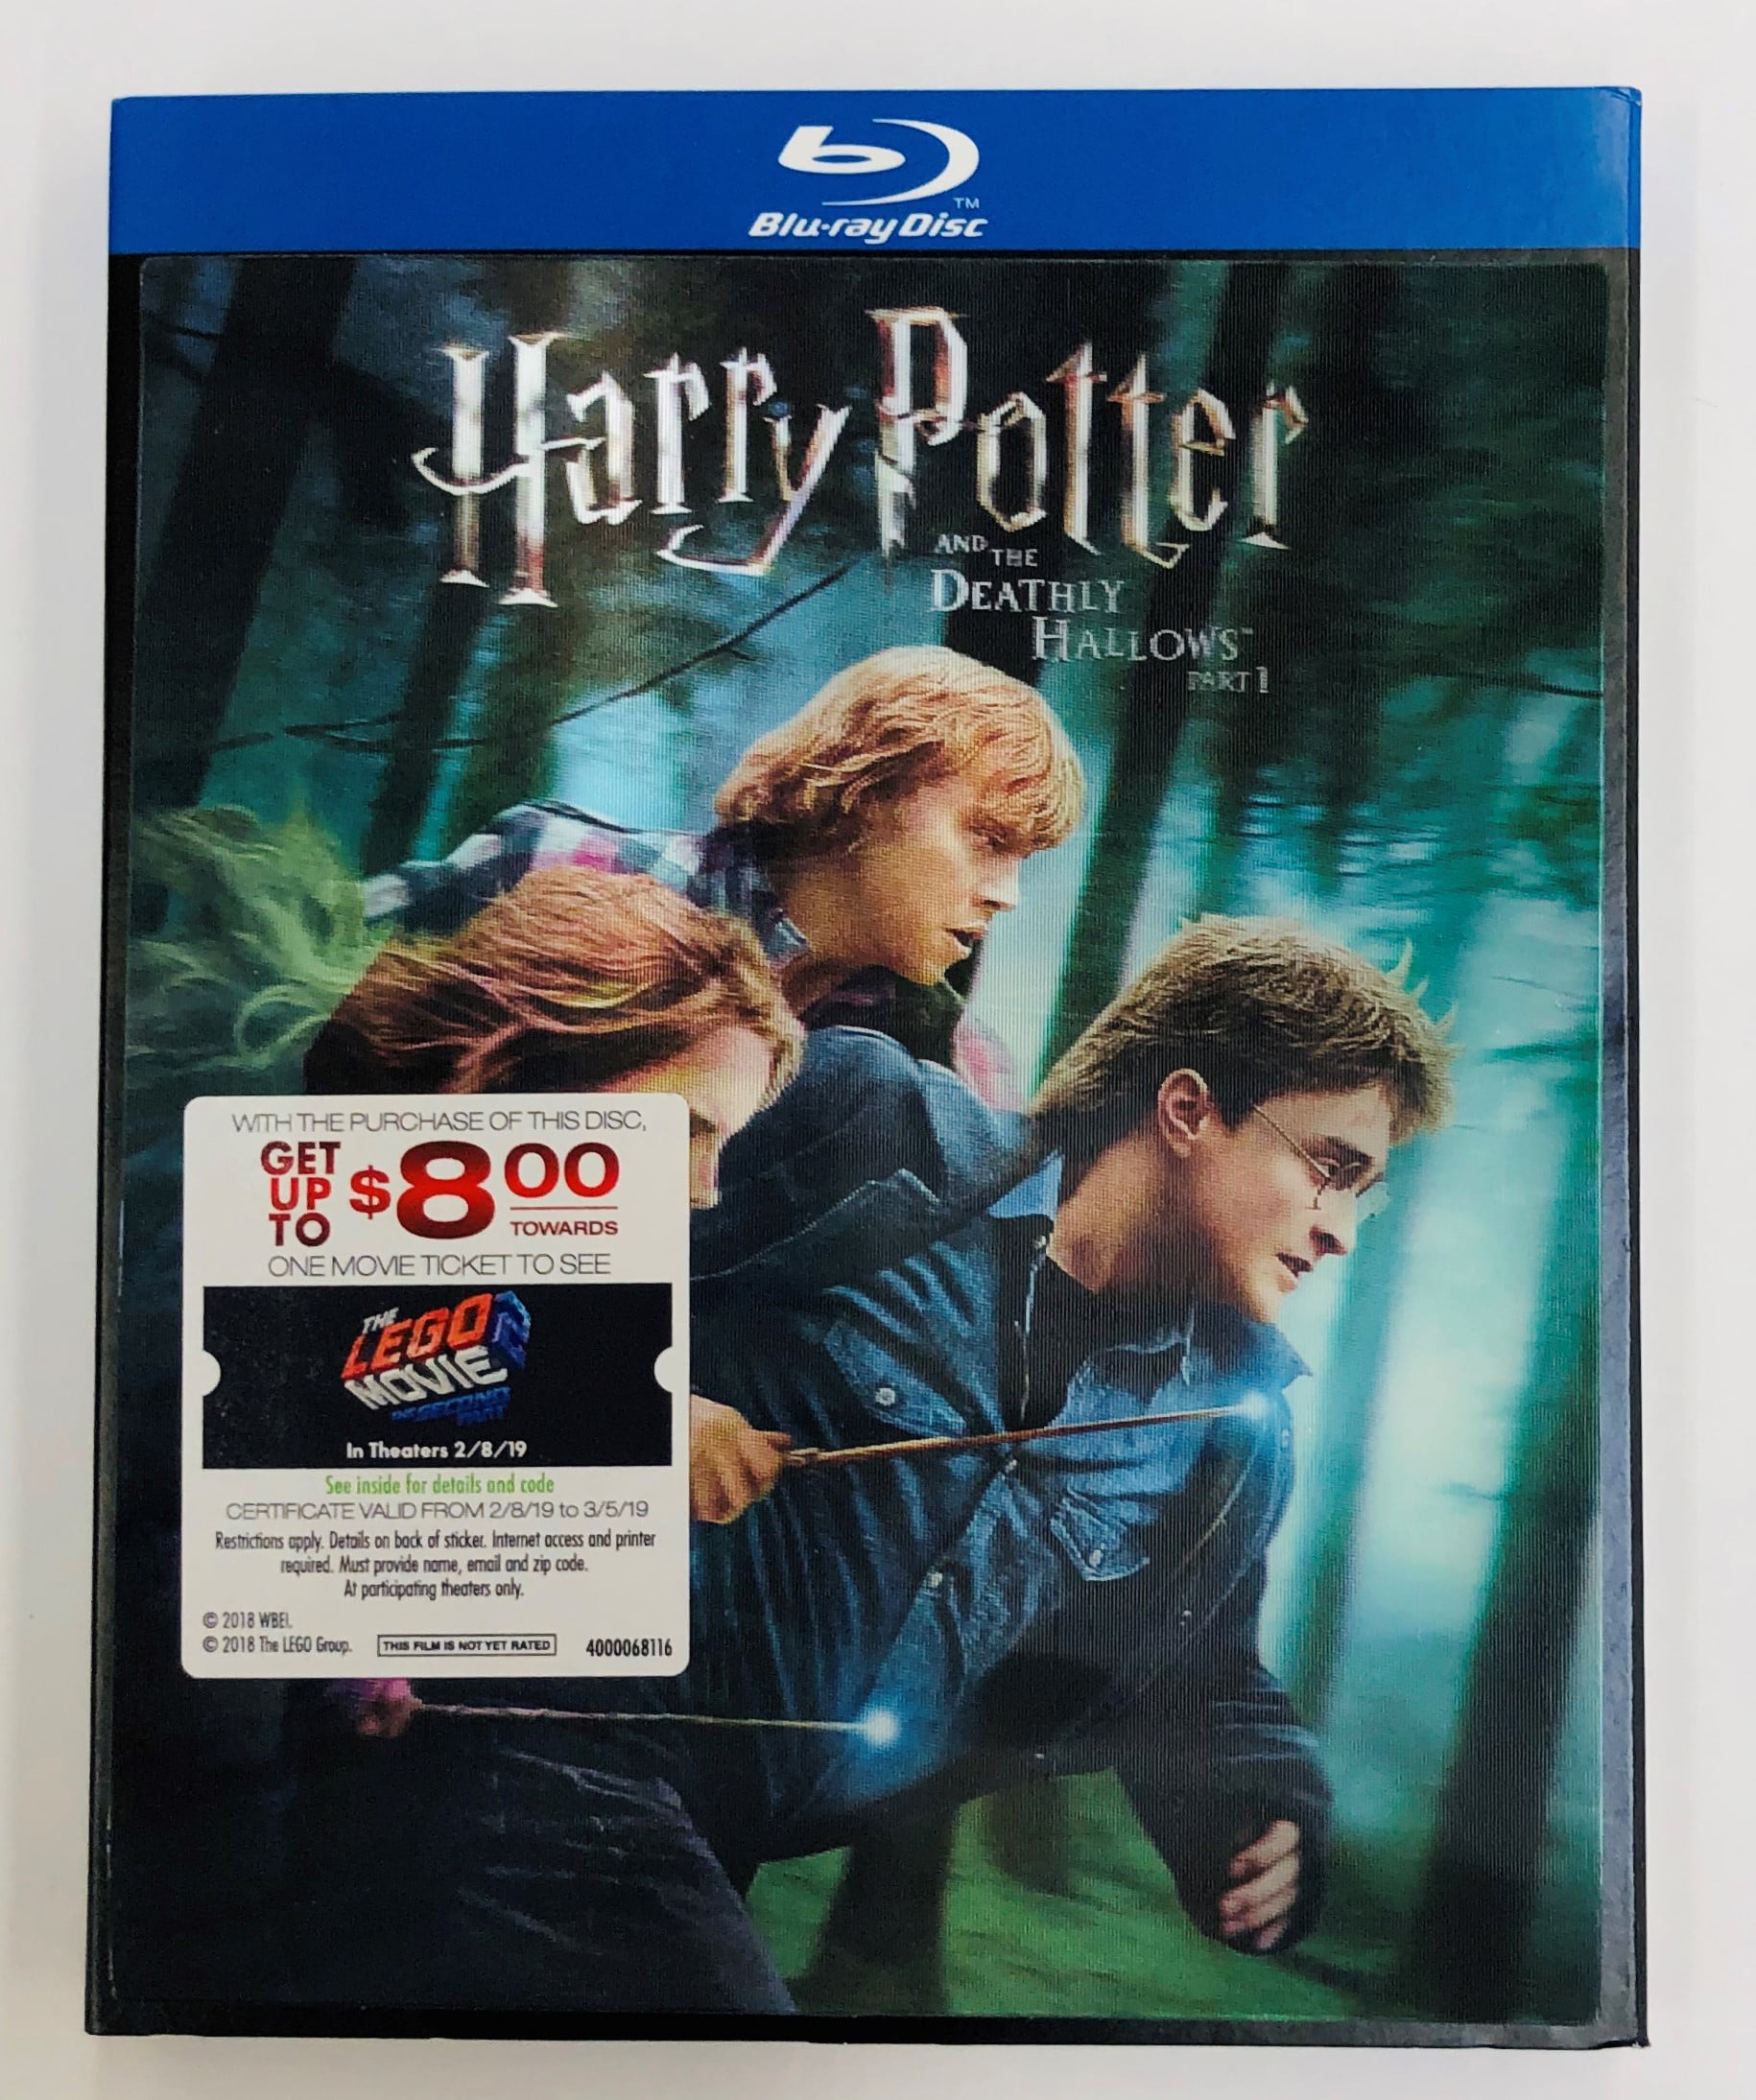 harry potter deathly hallows part 2 blu ray